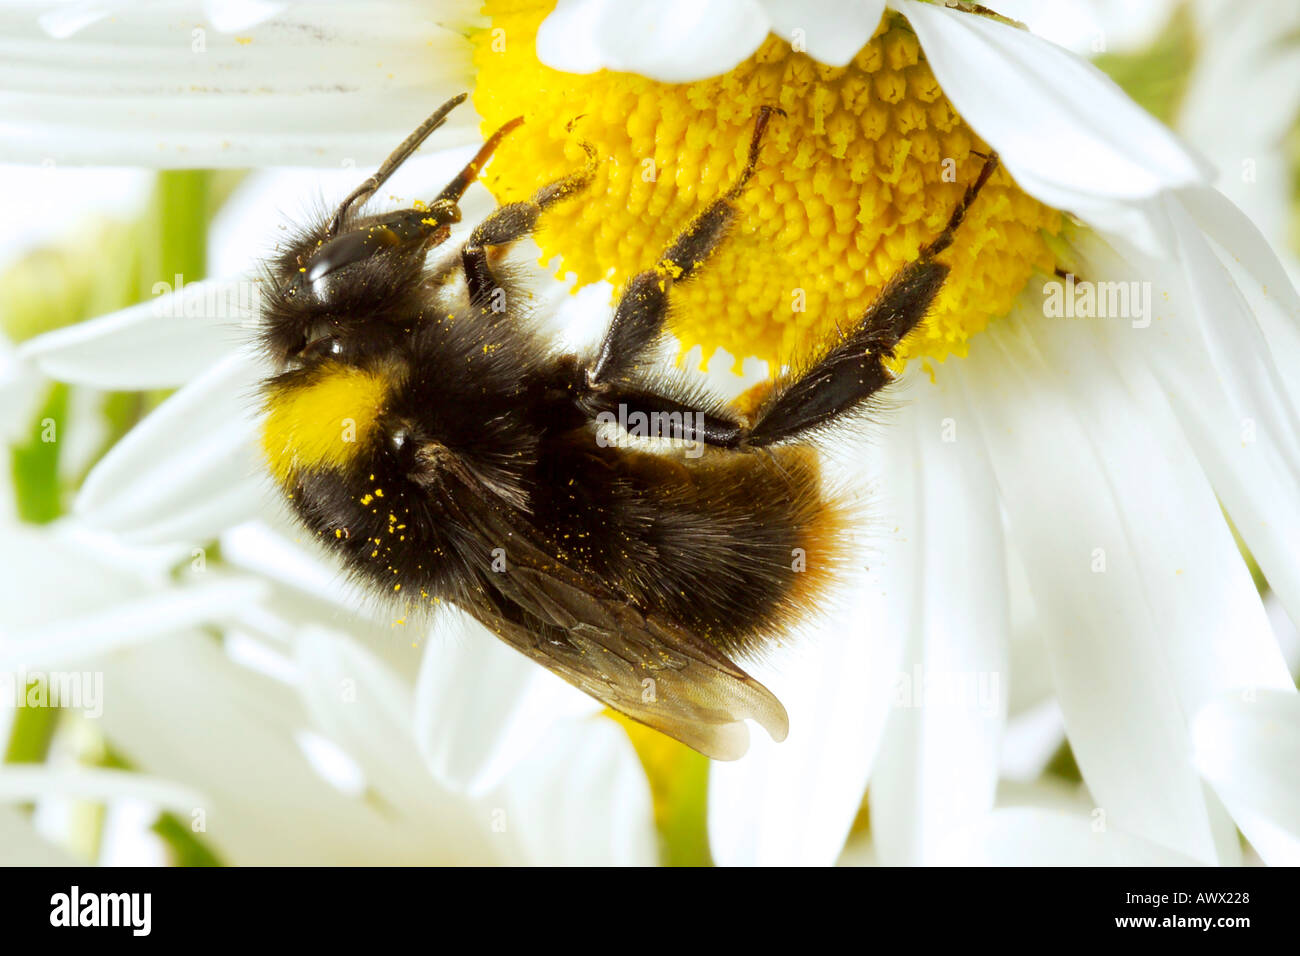 Bumble-bee (Bombus) on flower, close-up Stock Photo